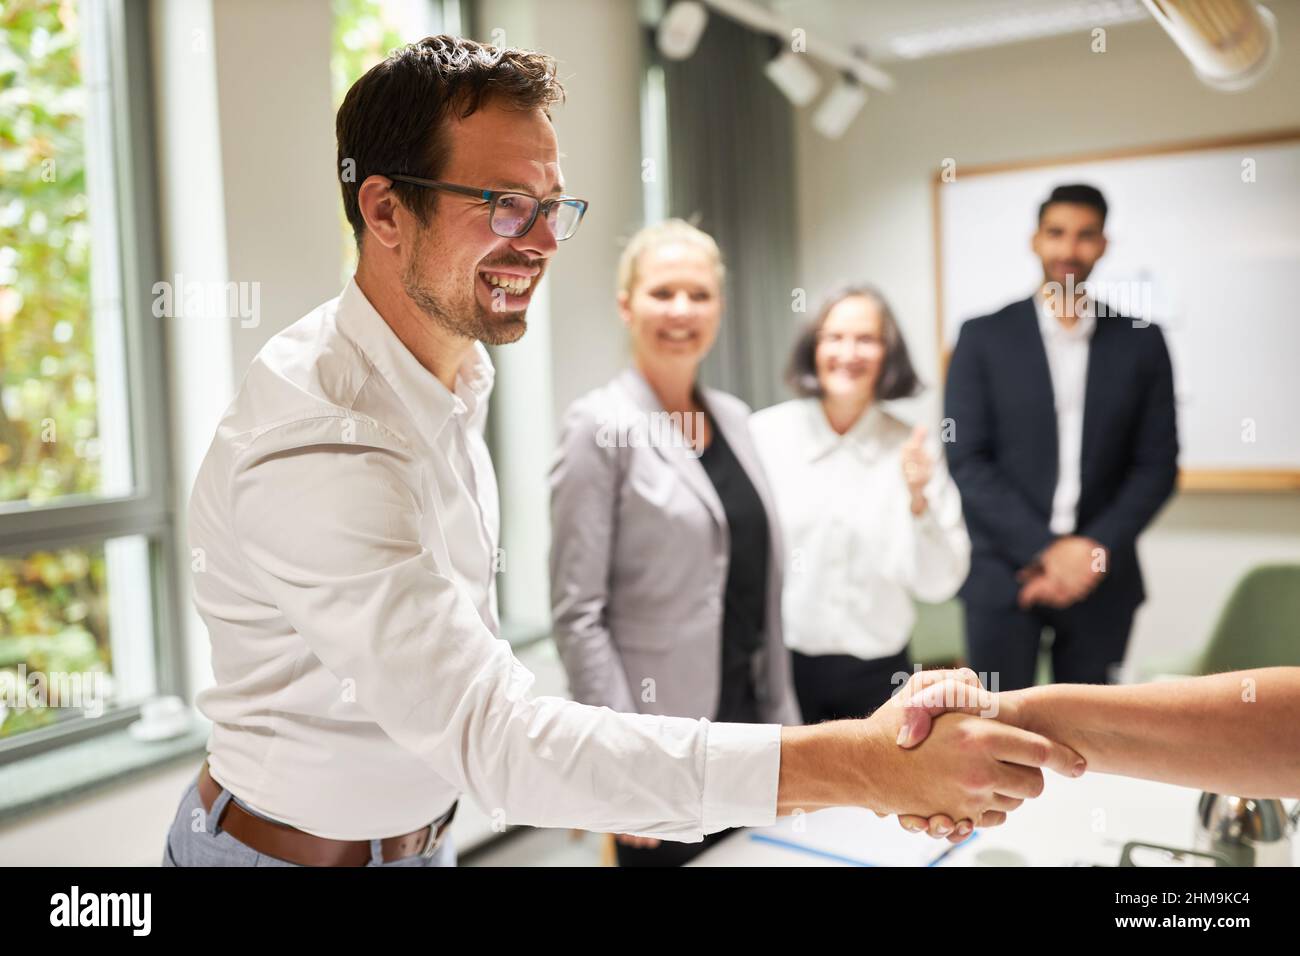 Business people shake hands as a symbol of greeting and congratulations in the conference room Stock Photo